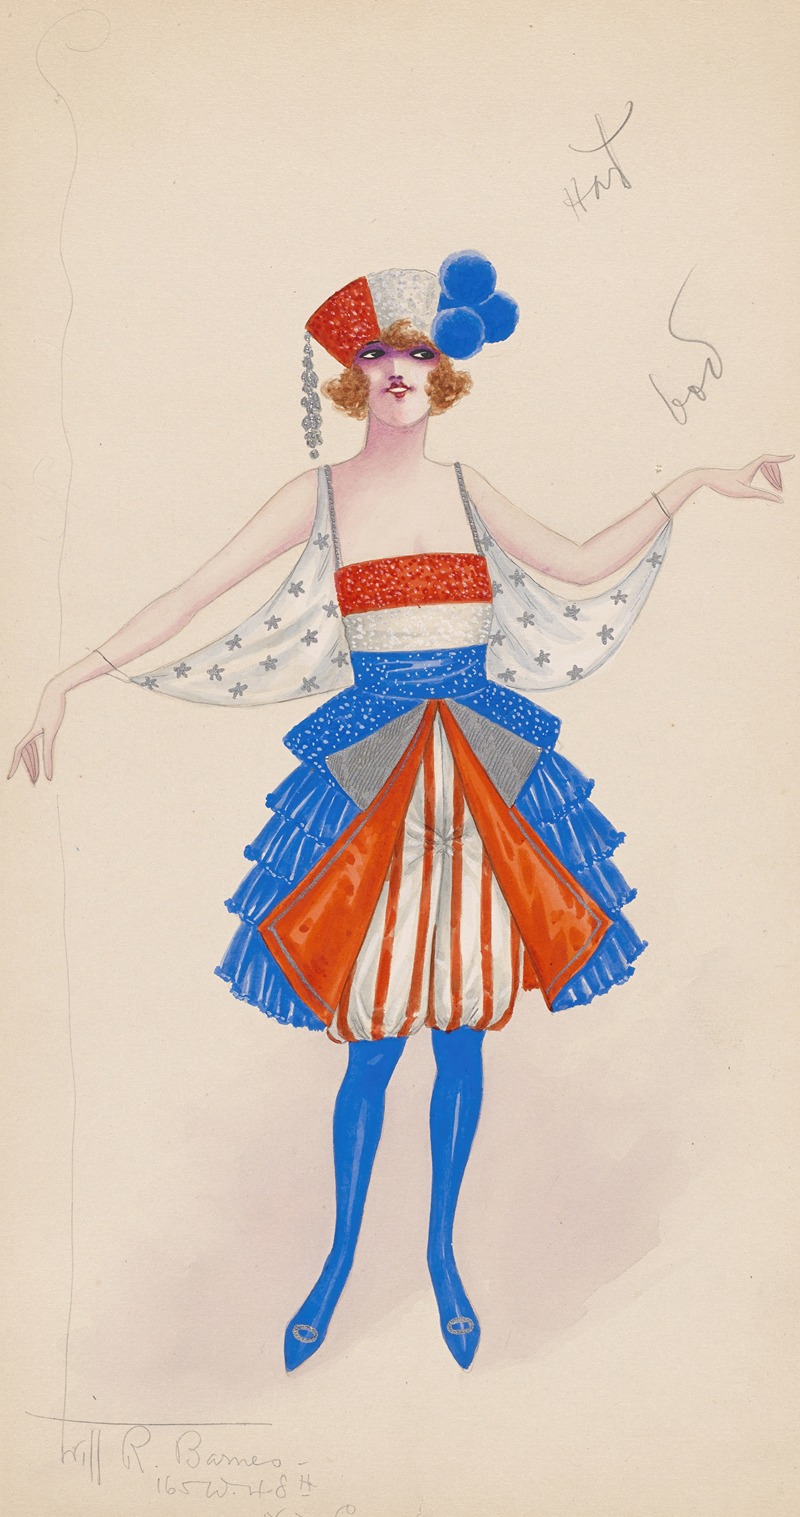 Will R. Barnes - Costume for girls in red, white, and blue